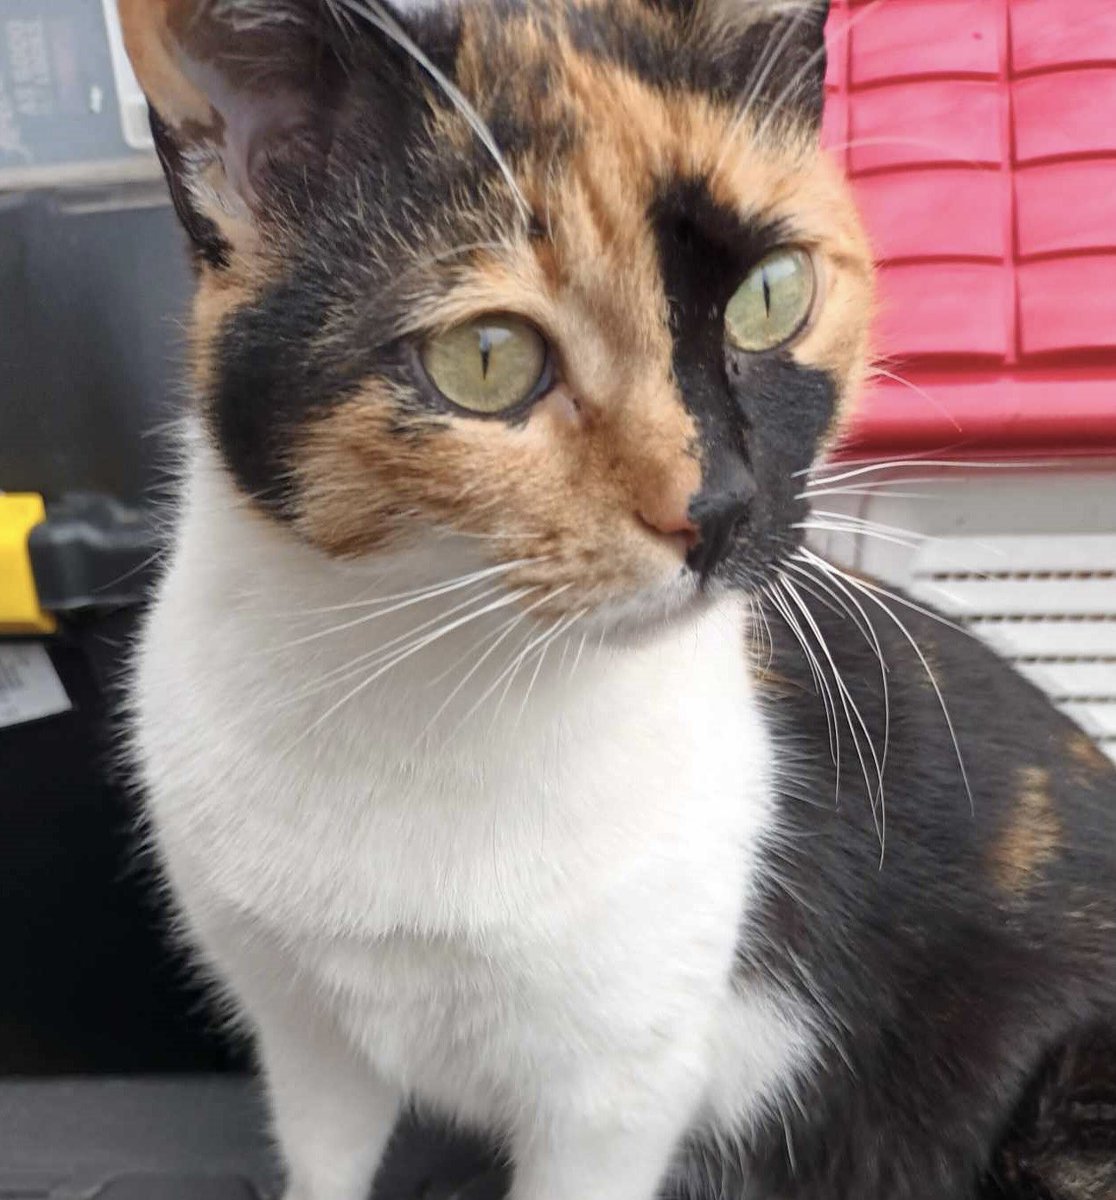 Do you recognise this cat? She has been straying in Chartridge (near #Chesham) for some weeks. She is not microchipped. Please get in touch if you know anything about her. #FoundCats #CatsOfTwitter #CatsOfX